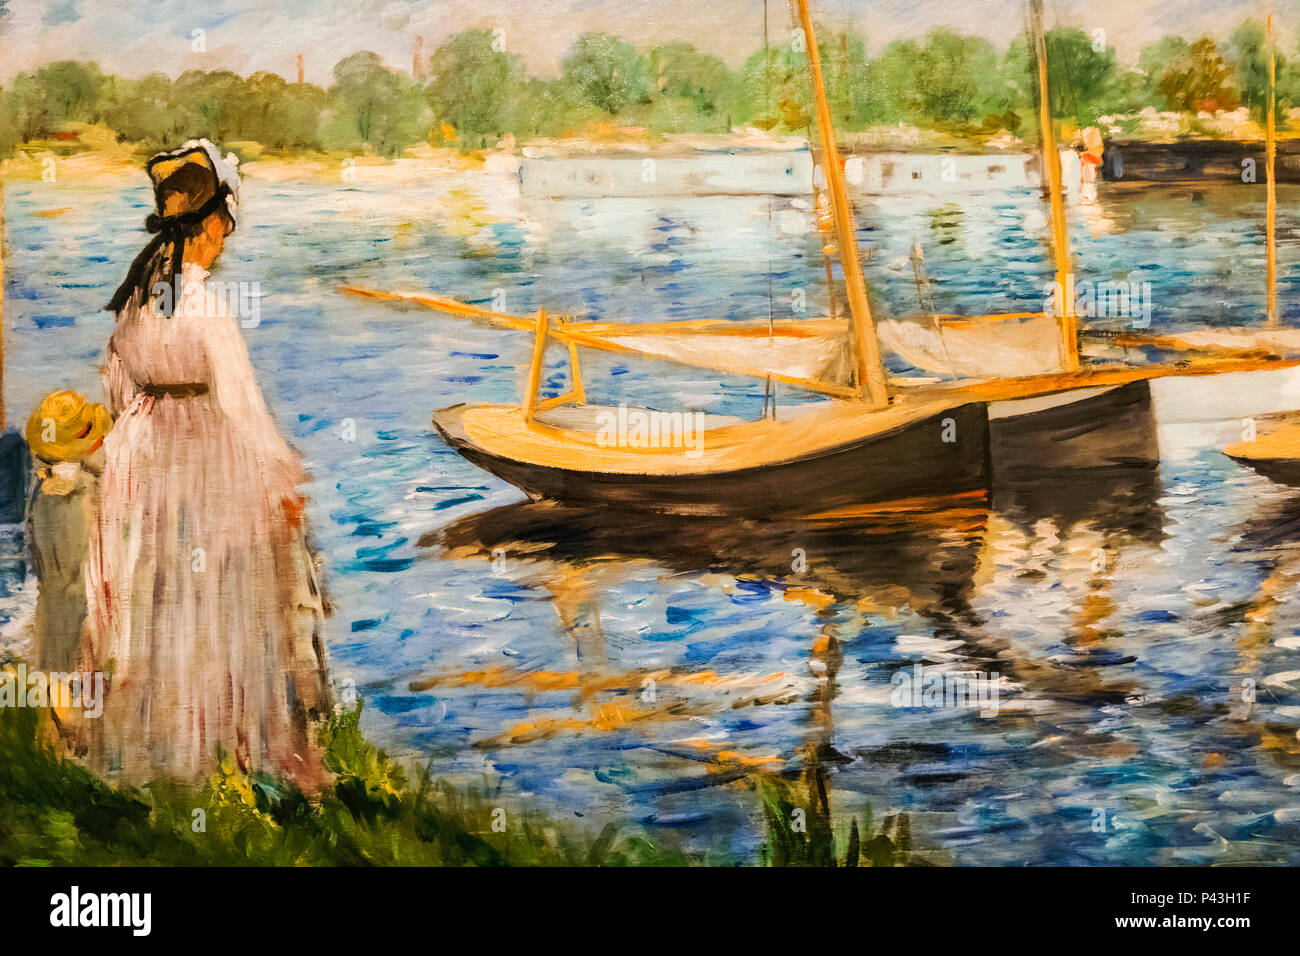 Painting titled "Banks Of The Seine at Argenteuil" by Edouard Manet dated 1874 Stock Photo